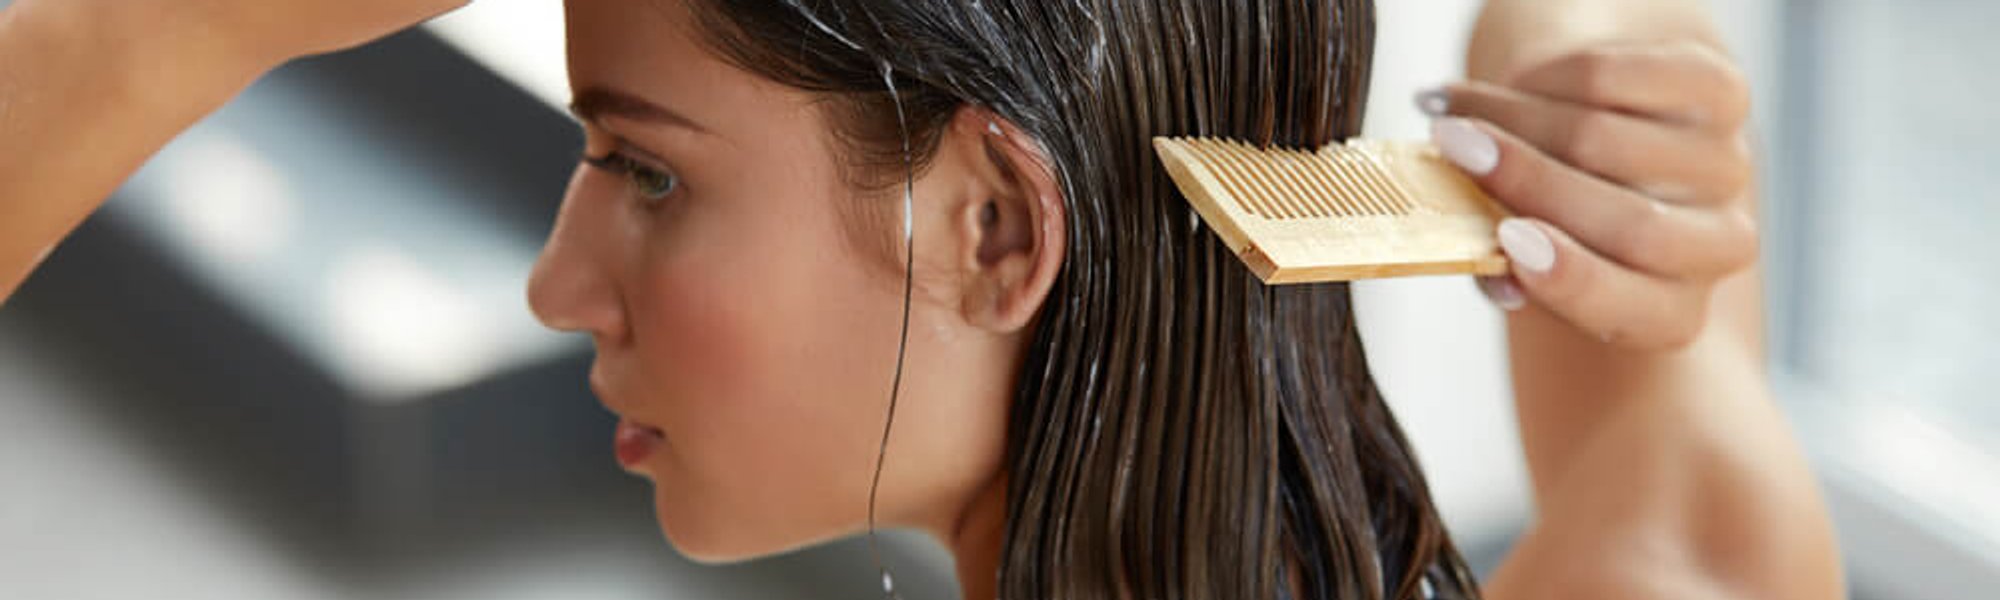 Beautiful woman brushing her wet hair with a wooden comb